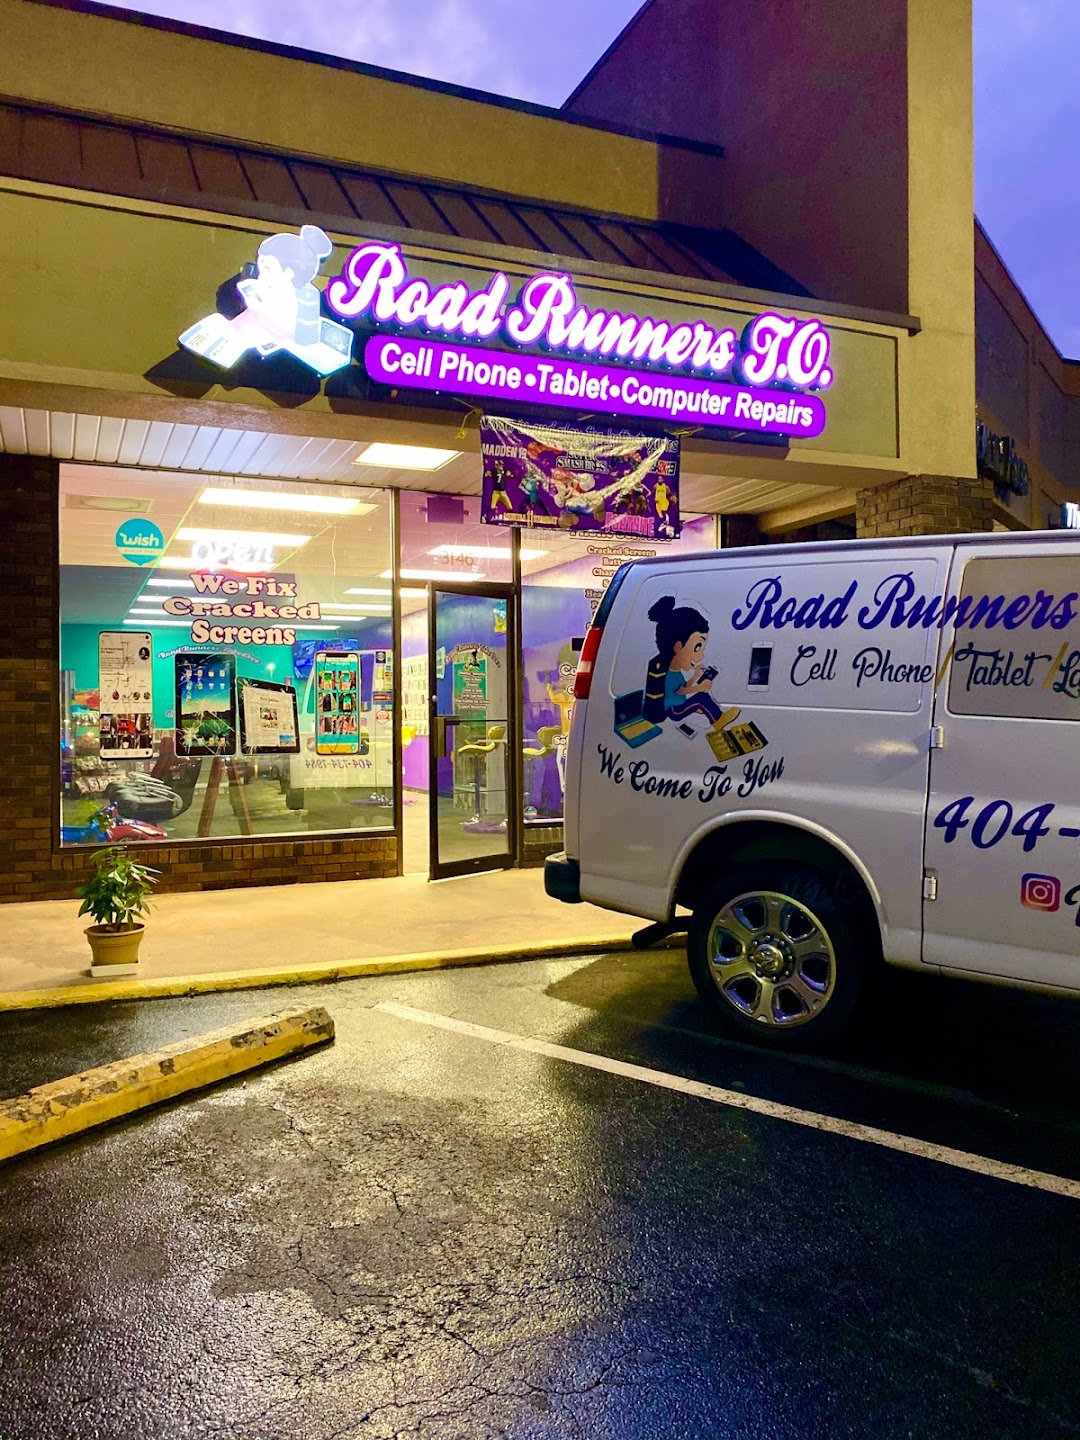 RoadRunners TakeOver Cell Phone, Computer Repairs & video game entertainment